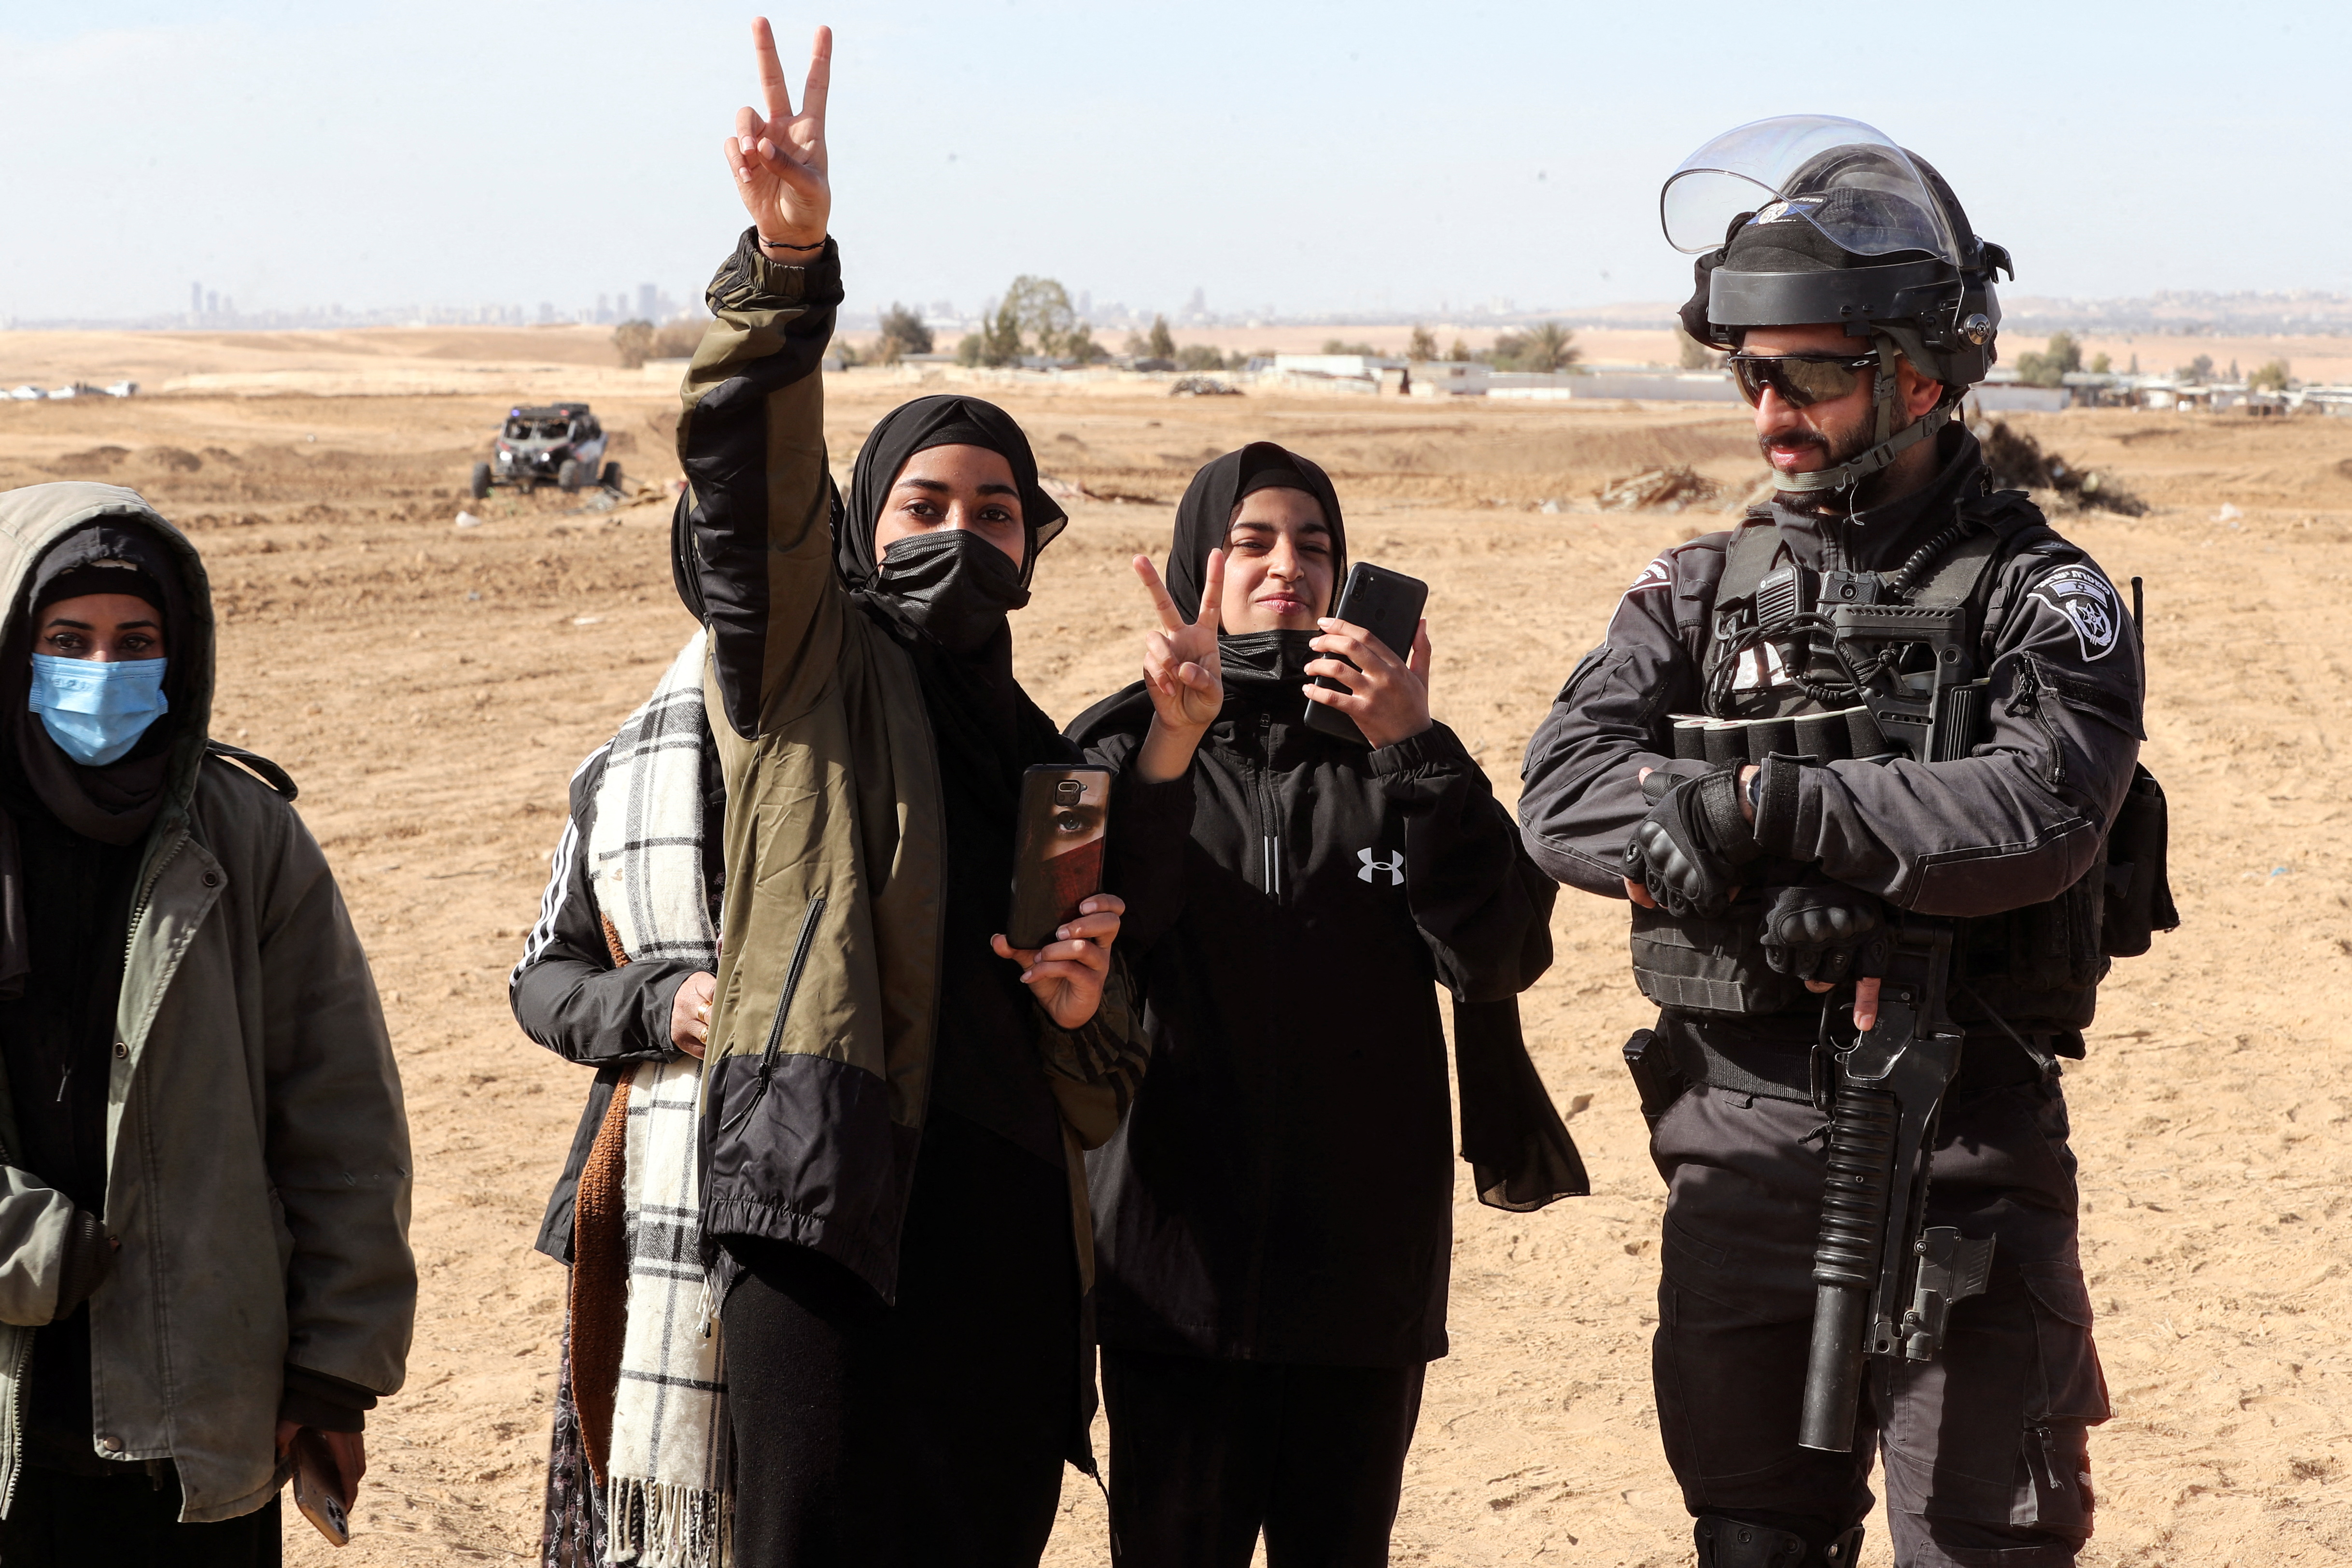 Bedouin women gesture as they stand by an Israeli policeman during a protest against forestation at the Negev desert village of Sawe al-Atrash, southern Israel